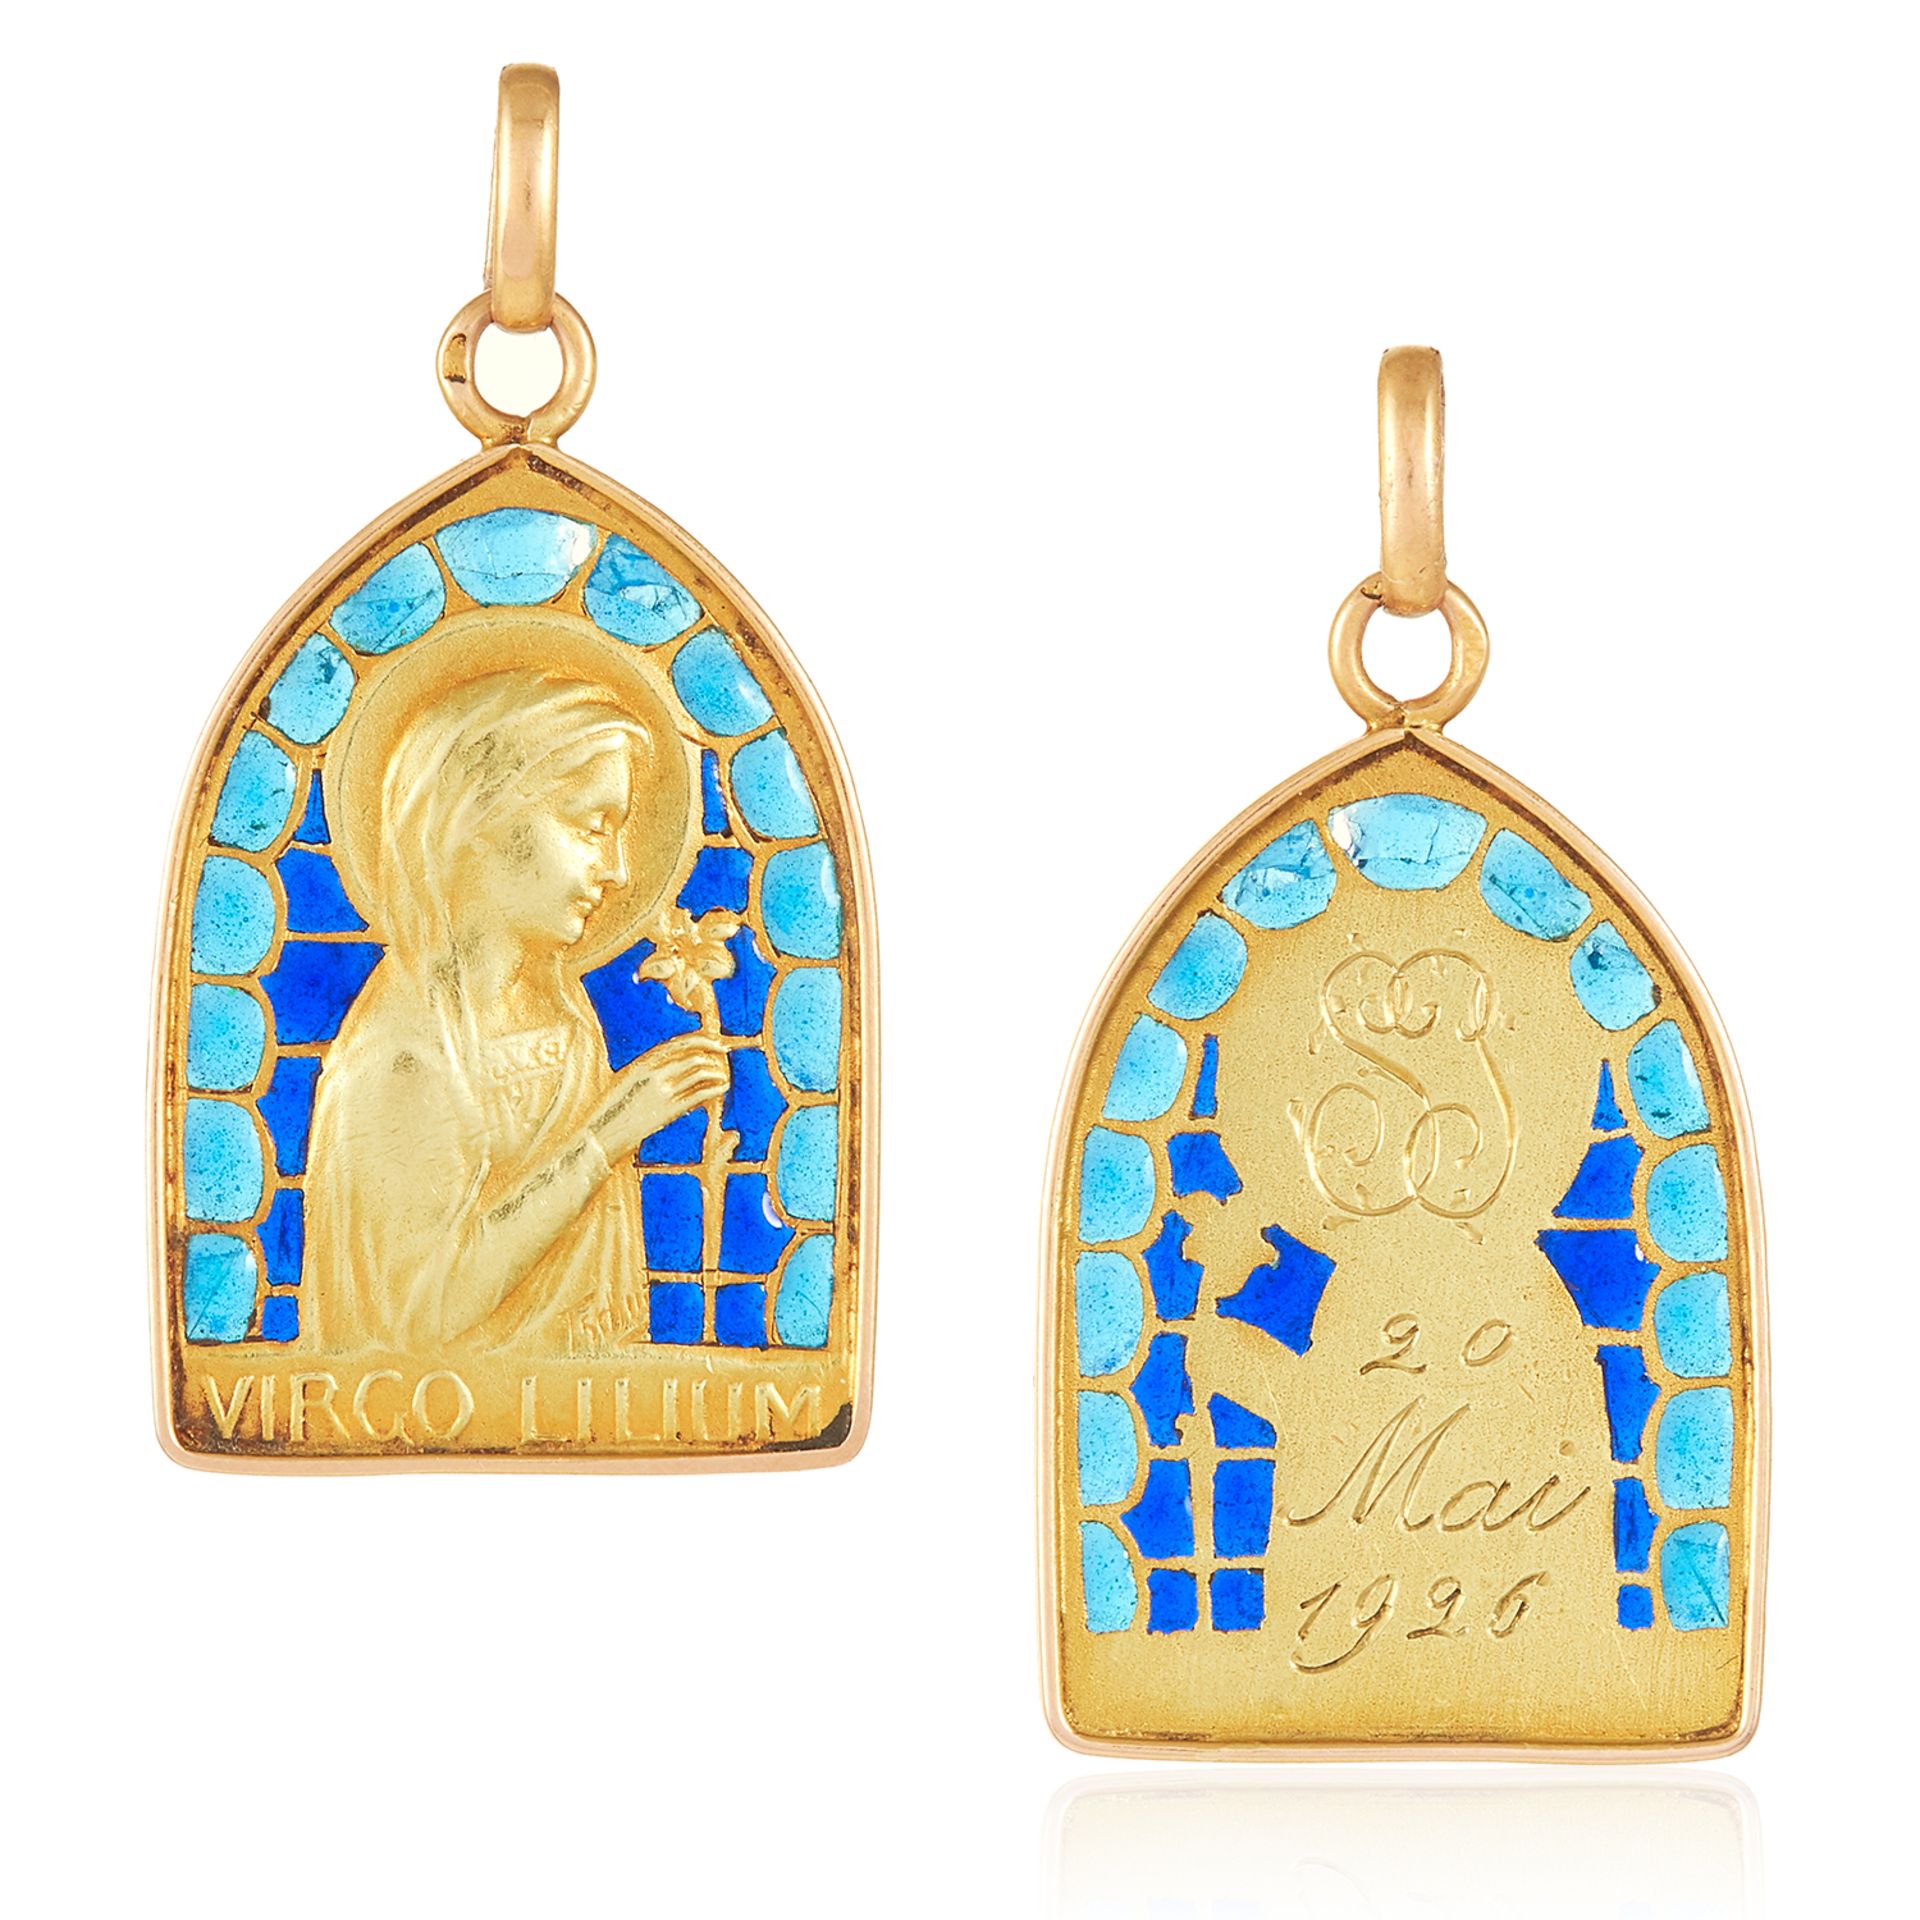 AN ANTIQUE PLIQUE A JOUR ENAMEL VIRGIN MARY PENDANT, 1920s in 18ct yellow gold, designed with the